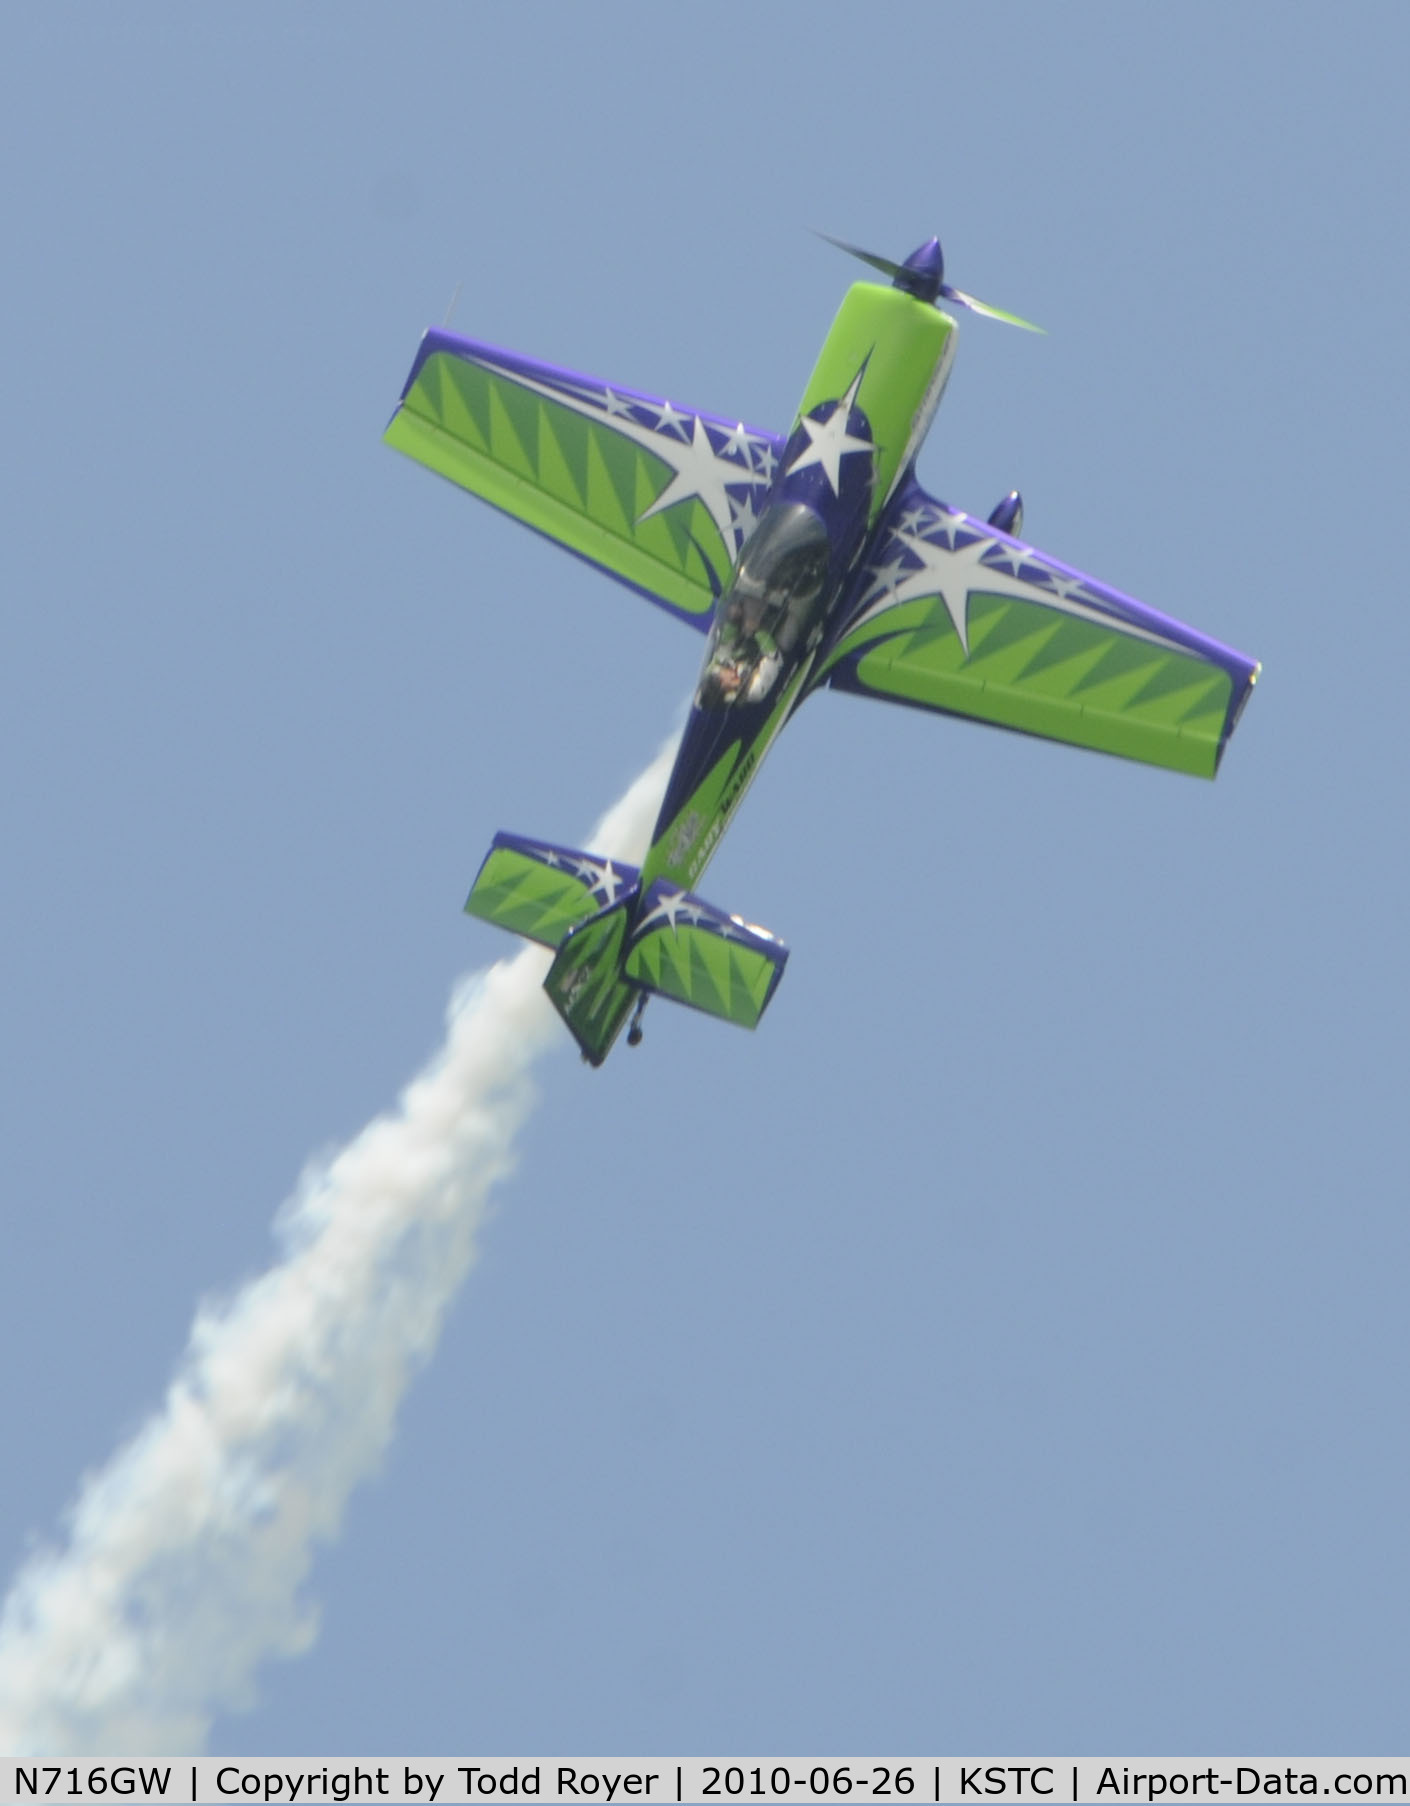 N716GW, 2006 MX Aircraft MX2 C/N 4, performing at the 2010 Great Minnesota Air Show